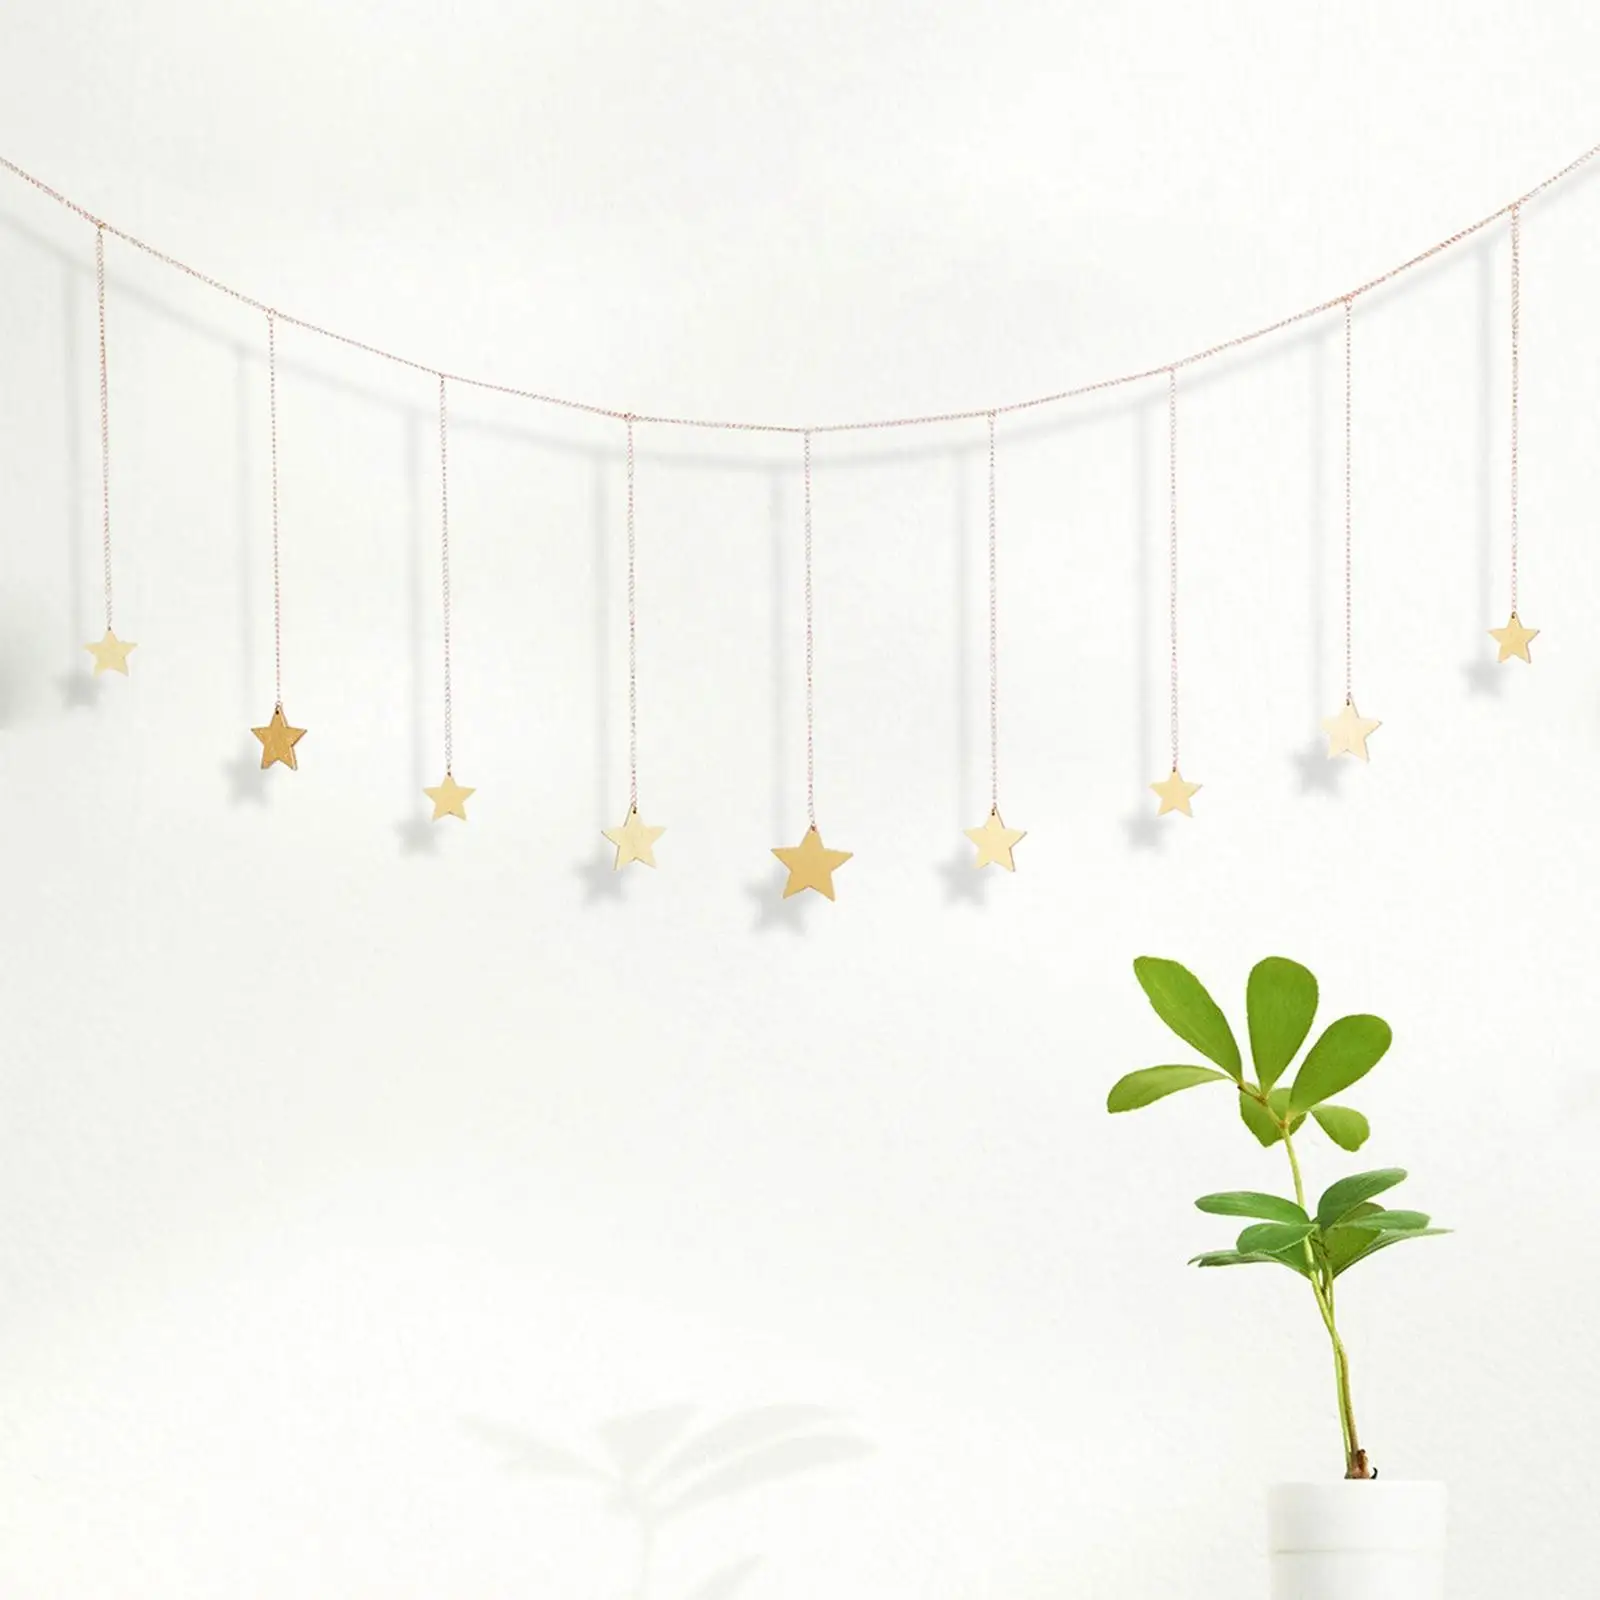 Bohemian Style Star Garland Decor Wall Art Aesthetic Decorative Wall Hanging Decoration for Party Dorm Living Room Office Home